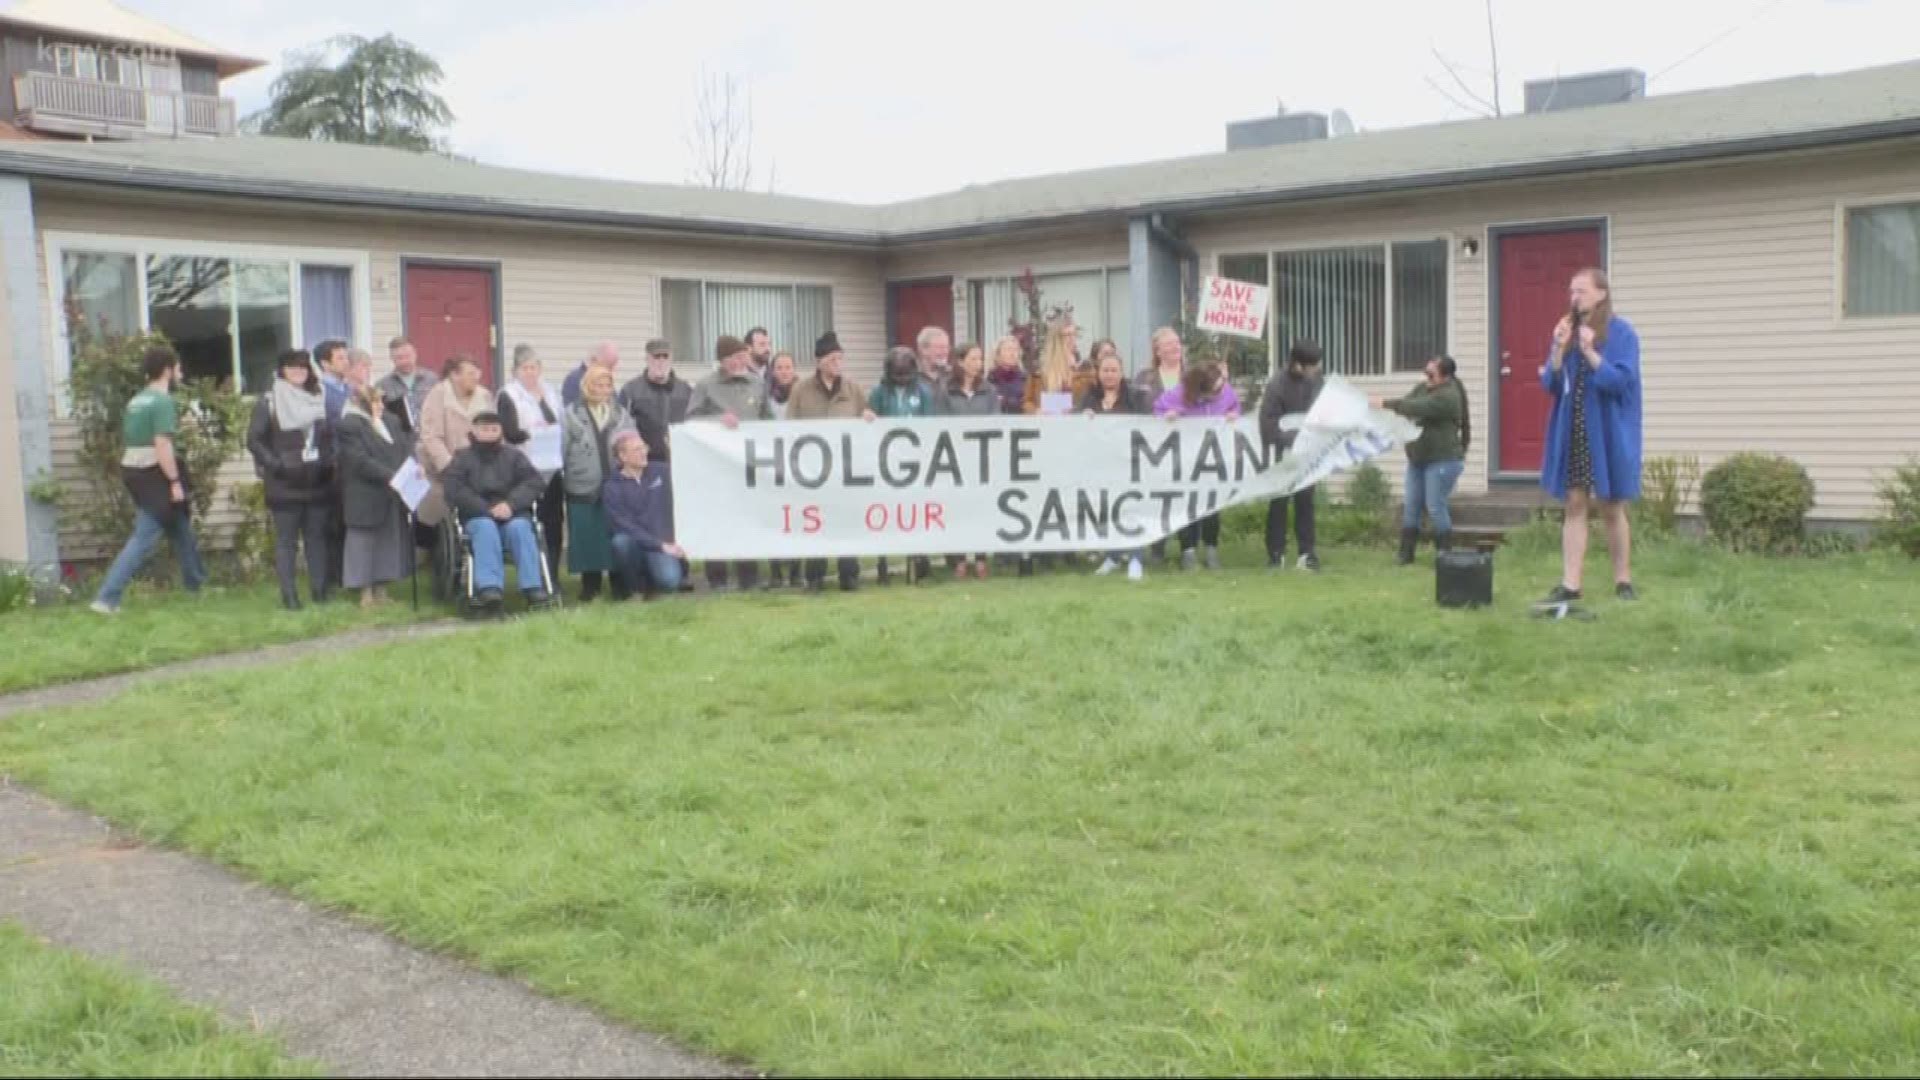 Tenants in the Holgate neighborhood are putting up a fight to stay.